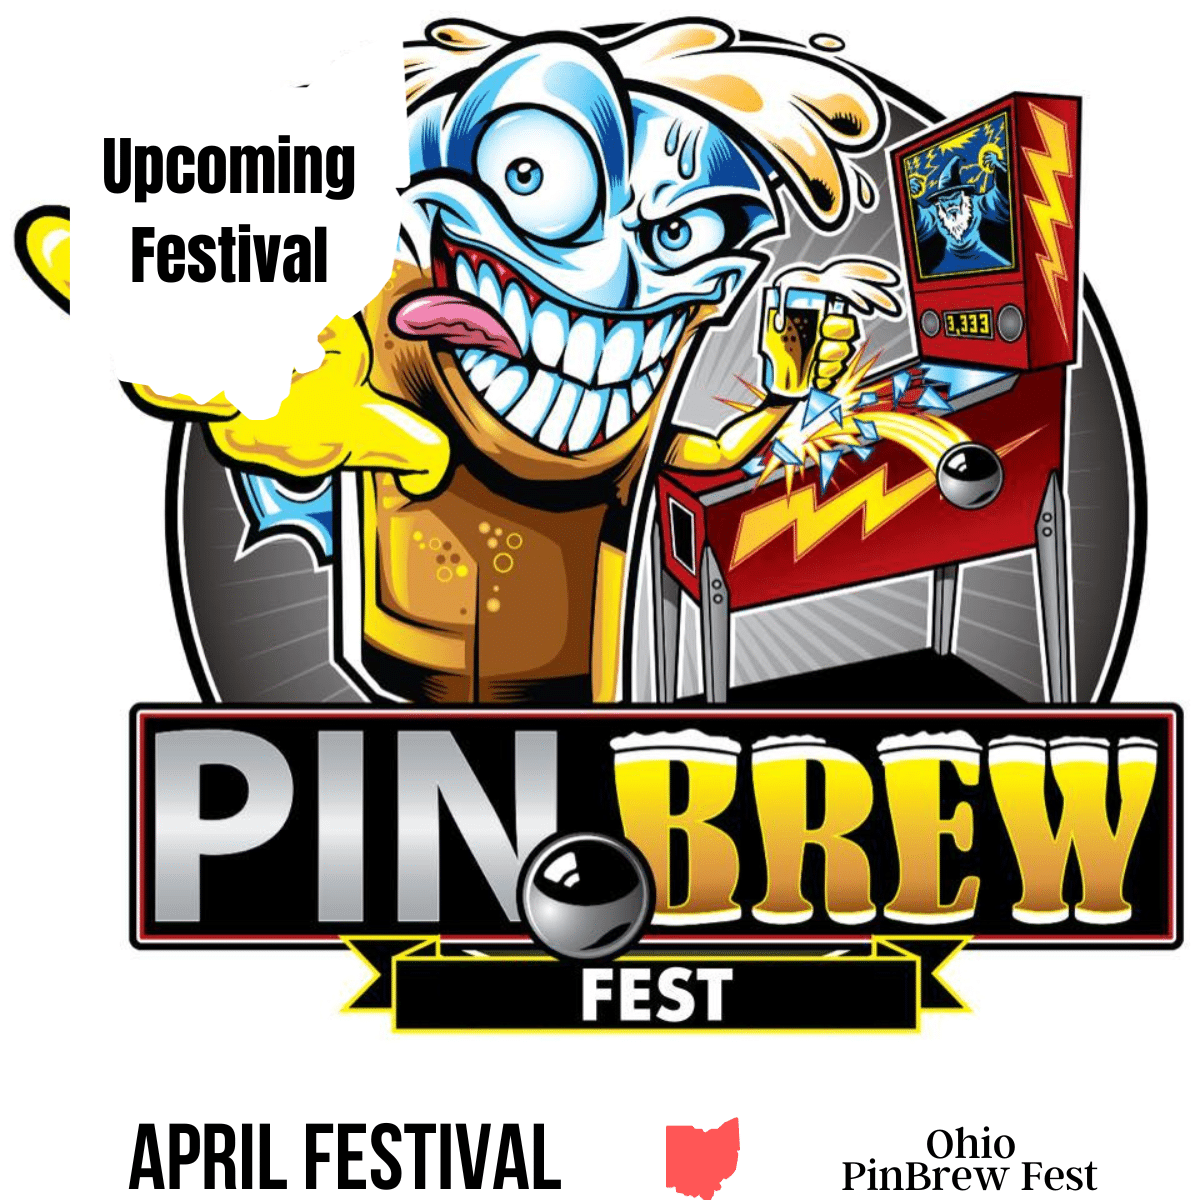 A square image of a personified beer mug holding a beer in one hand and holding three fingers up on the other hand. A pinball machine is in the background. A white image of Ohio has text Upcoming Festival. A white strip across the bottom has text April Festival Ohio PinBrew Fest.